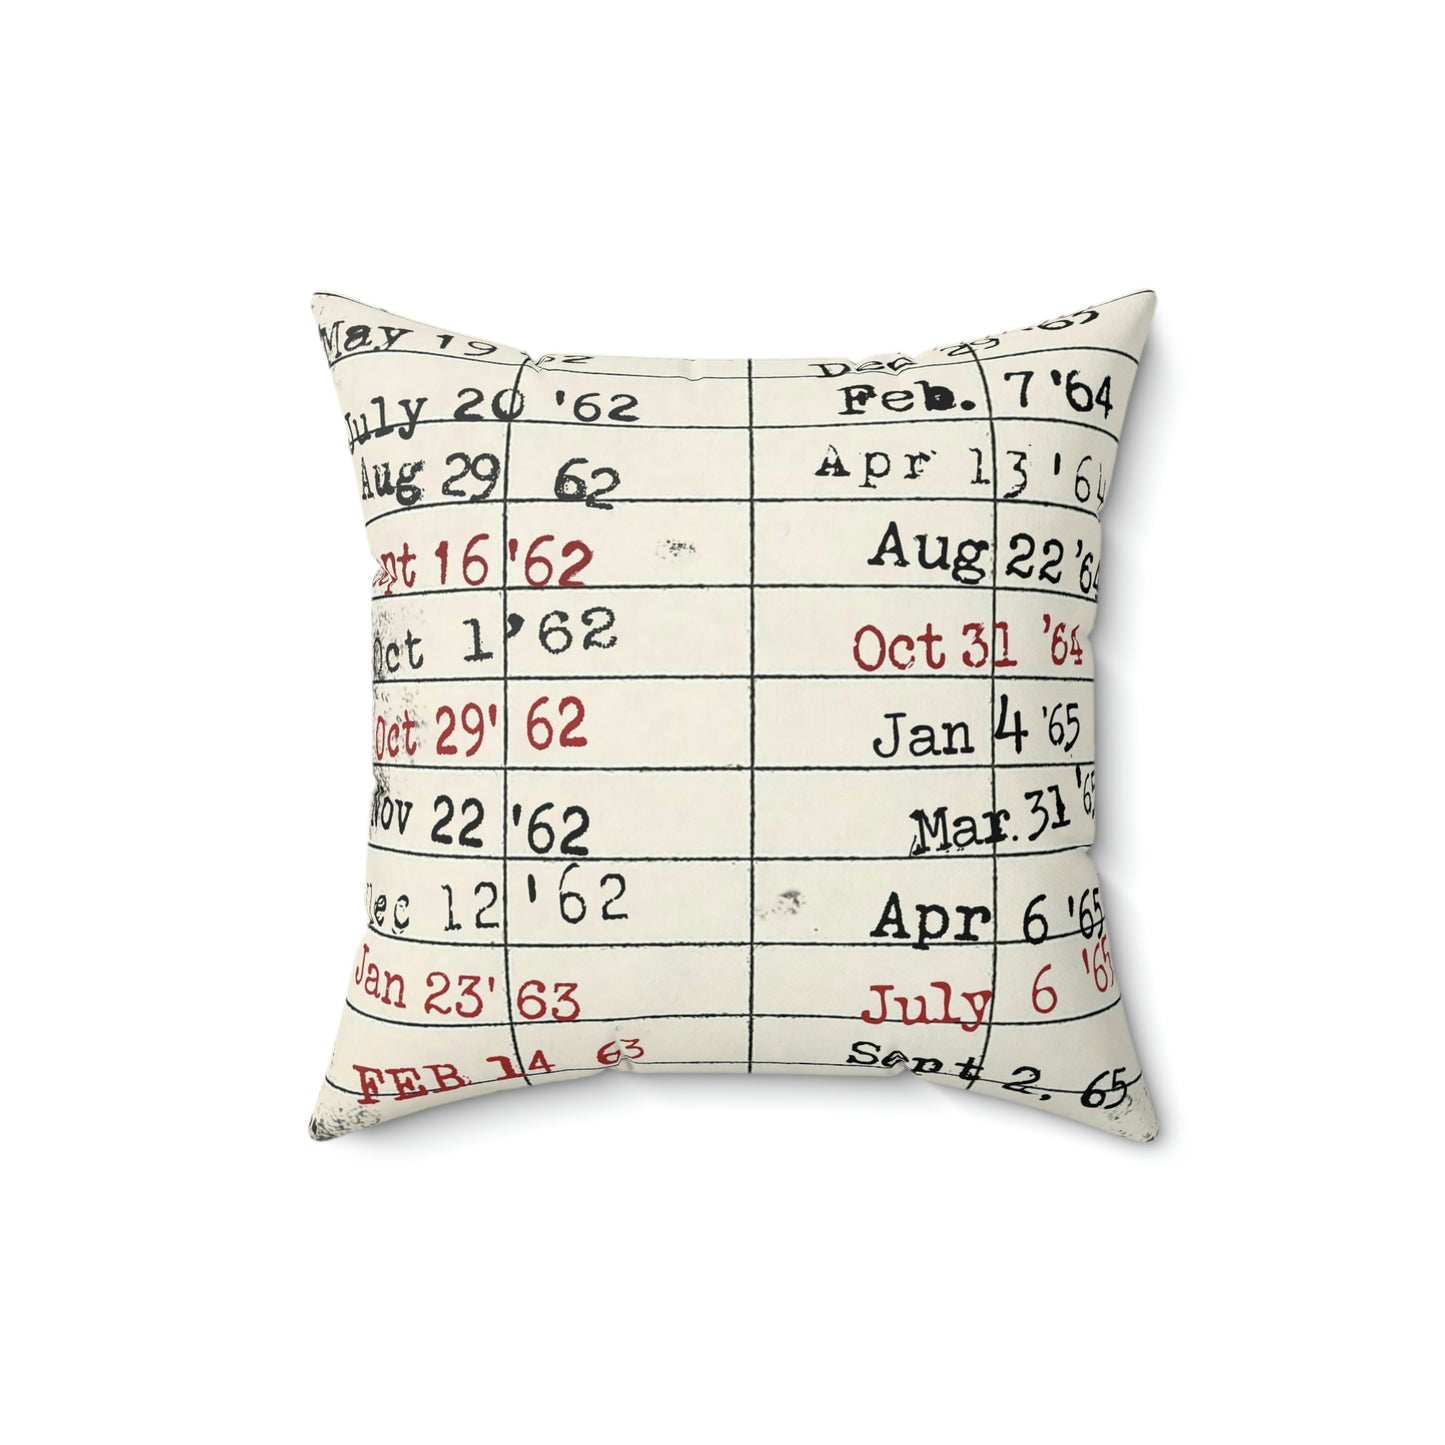 Vintage Library Due Date Card Square Pillow, Bookish Gift For Librarian, Teacher, Reader, Bookworm, Reading Book, Retro Gift, (4 sizes)